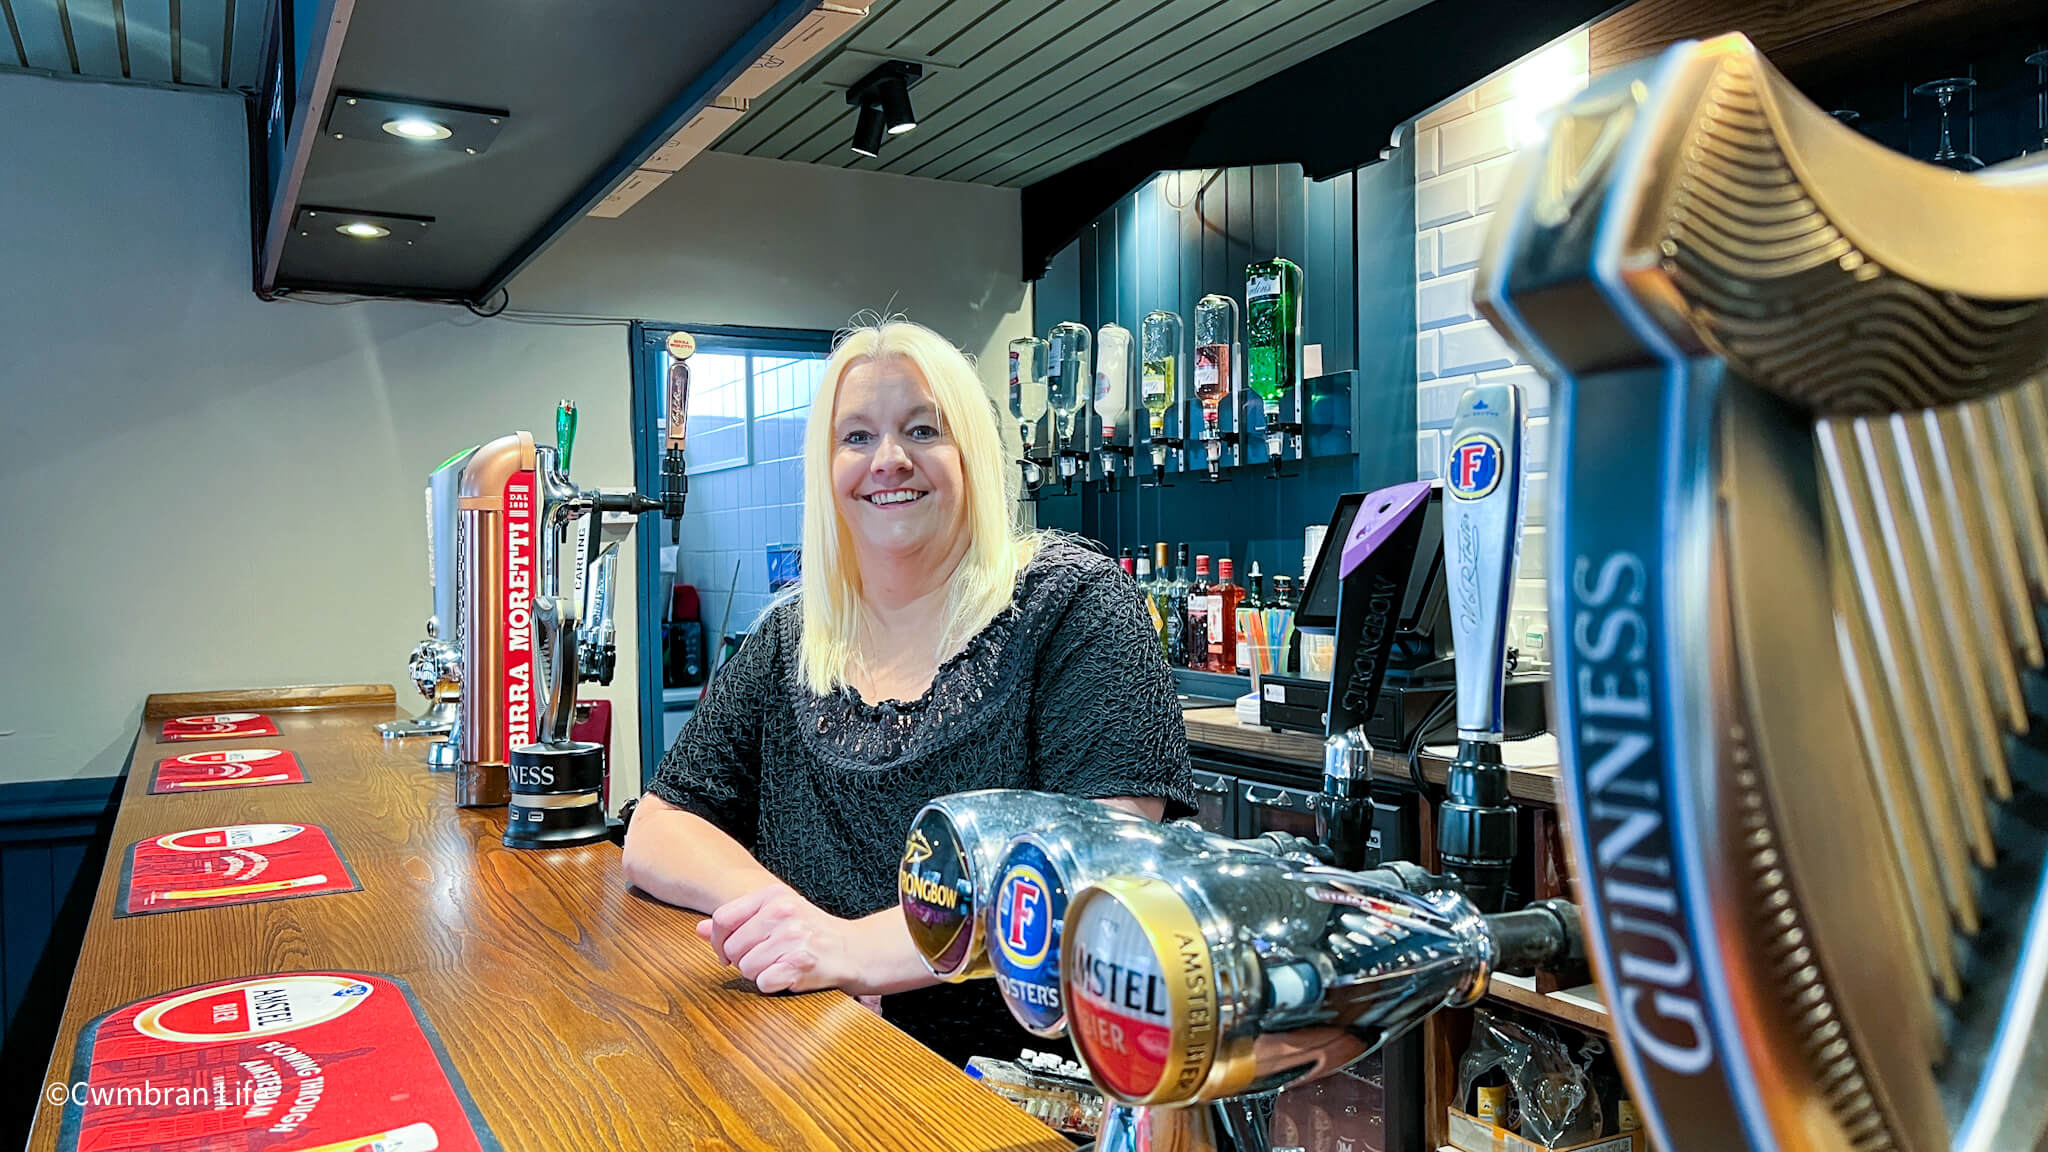 Nic Bullimore, landlady, at the bar of the Six in Hand